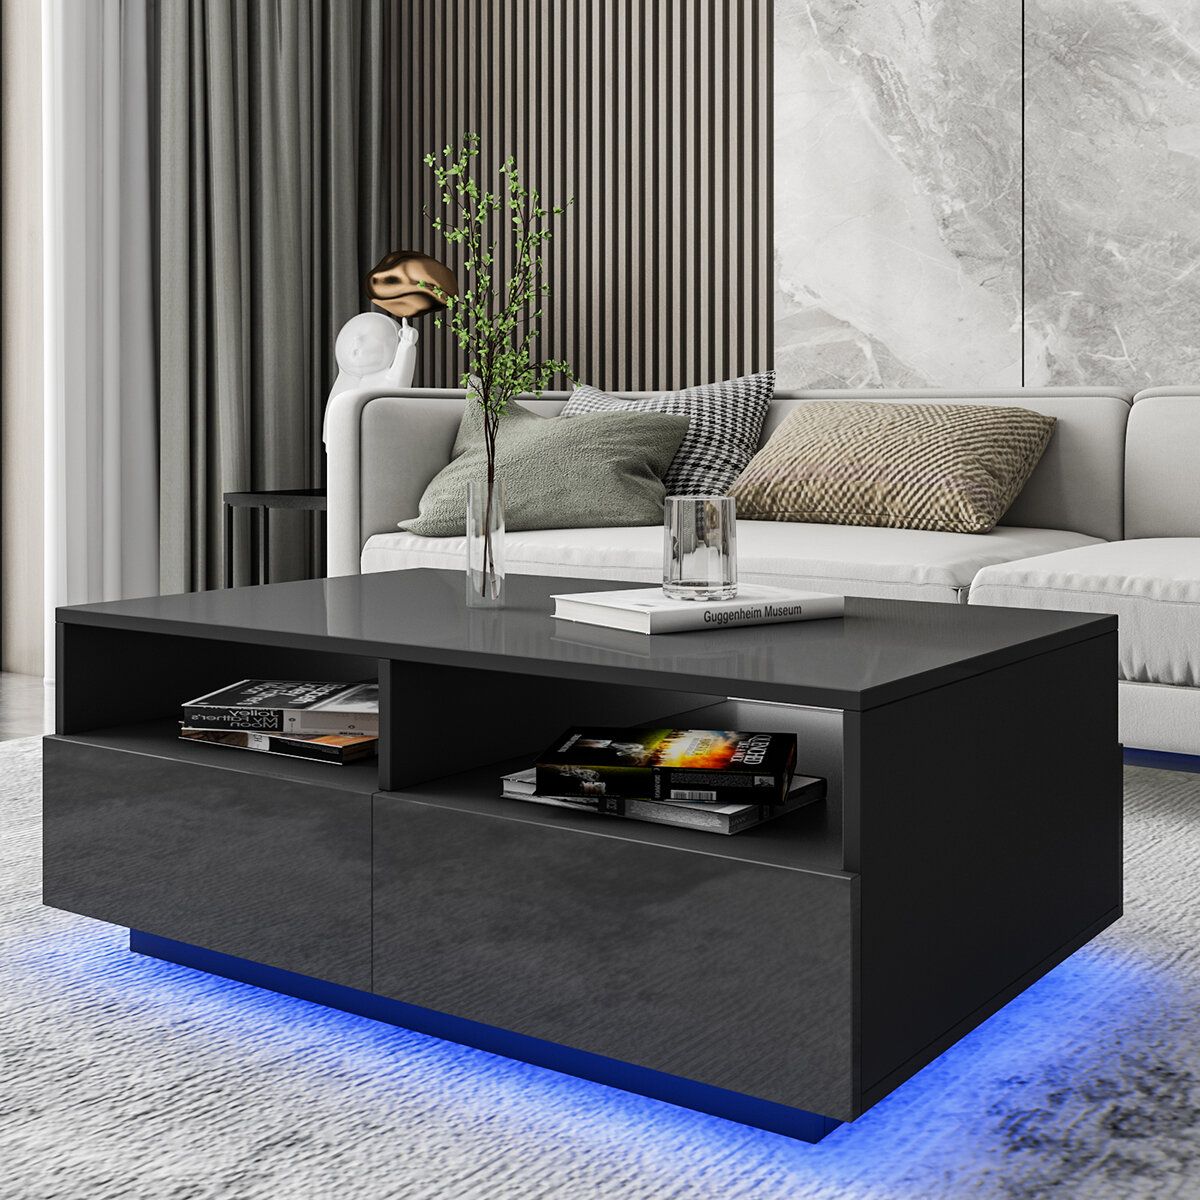 Ivy Bronx Gastelum Led Coffee Table With Colorful Rgb Led Lights & 4 Drawers  & Reviews | Wayfair With Regard To Led Coffee Tables With 4 Drawers (Photo 10 of 15)